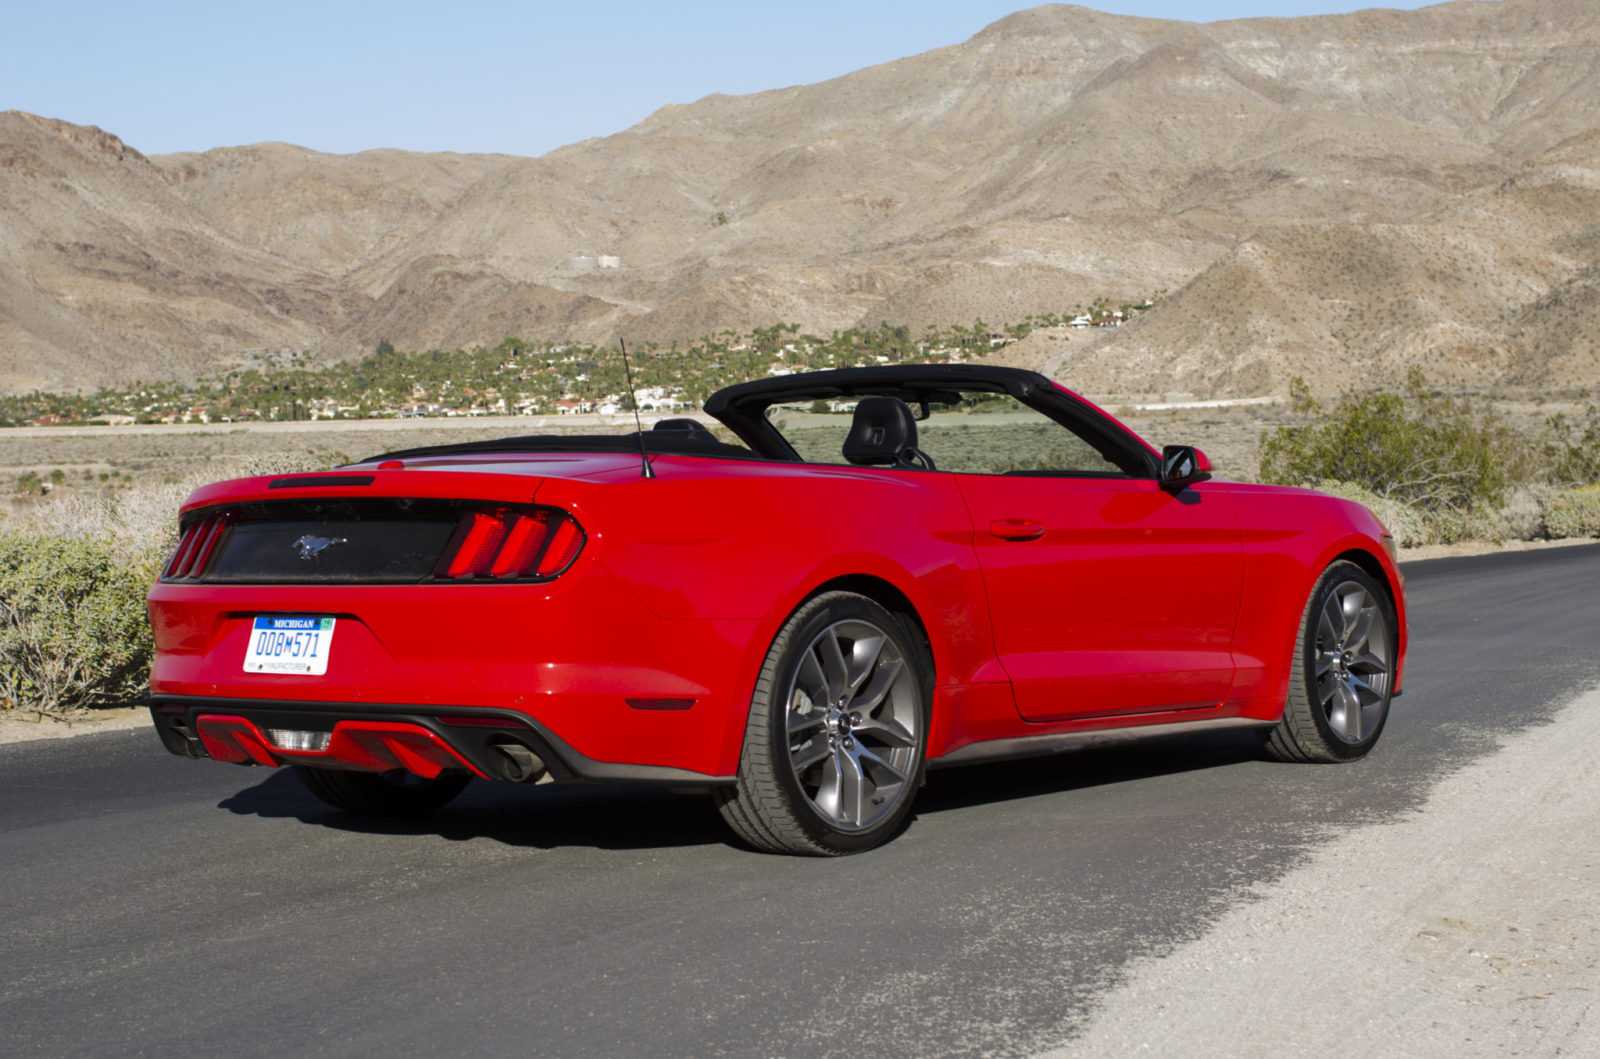 2015 Ford Mustang Convertible in Palm Springs, California